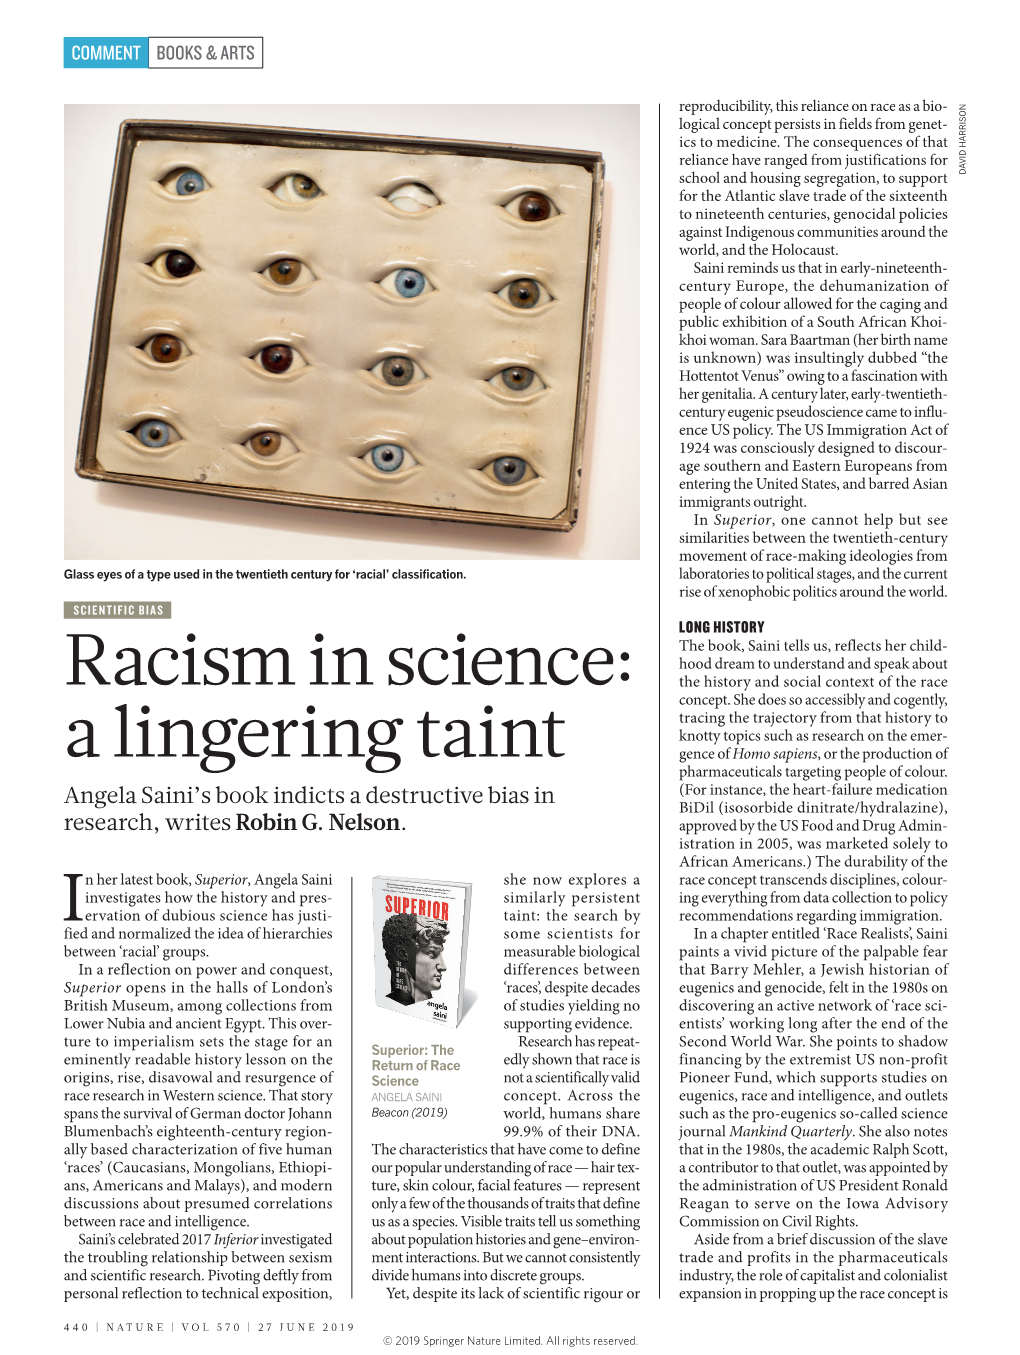 Racism in Science: the History and Social Context of the Race Concept